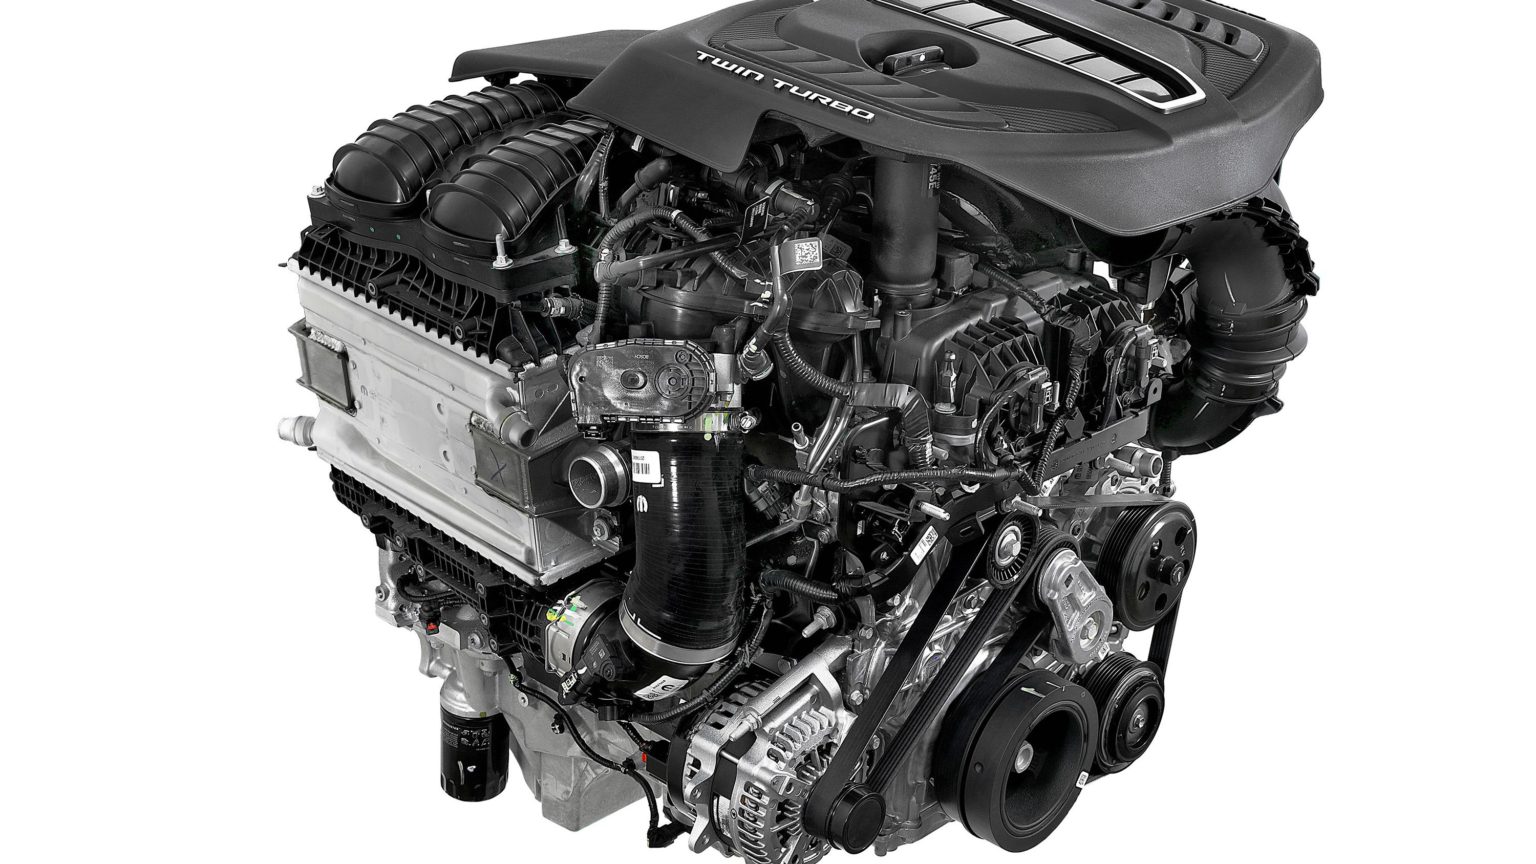 The 3.0-liter twin-turbo engine delivers big power numbers.